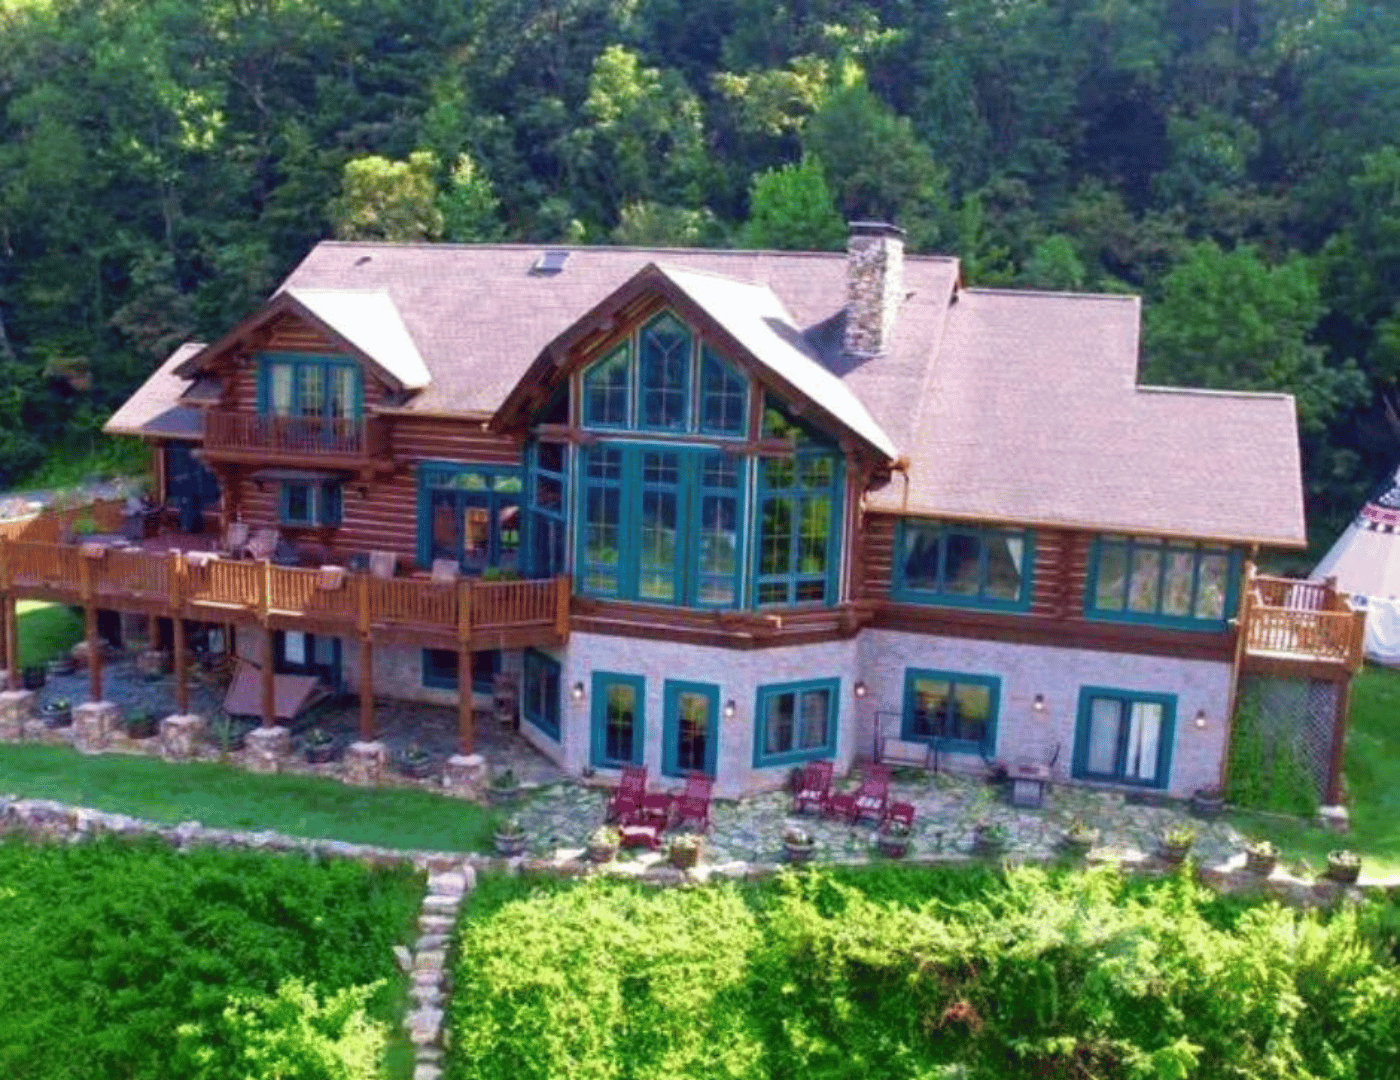 drone photo of 3 story log cabin lodge with large a-frame windows and decks